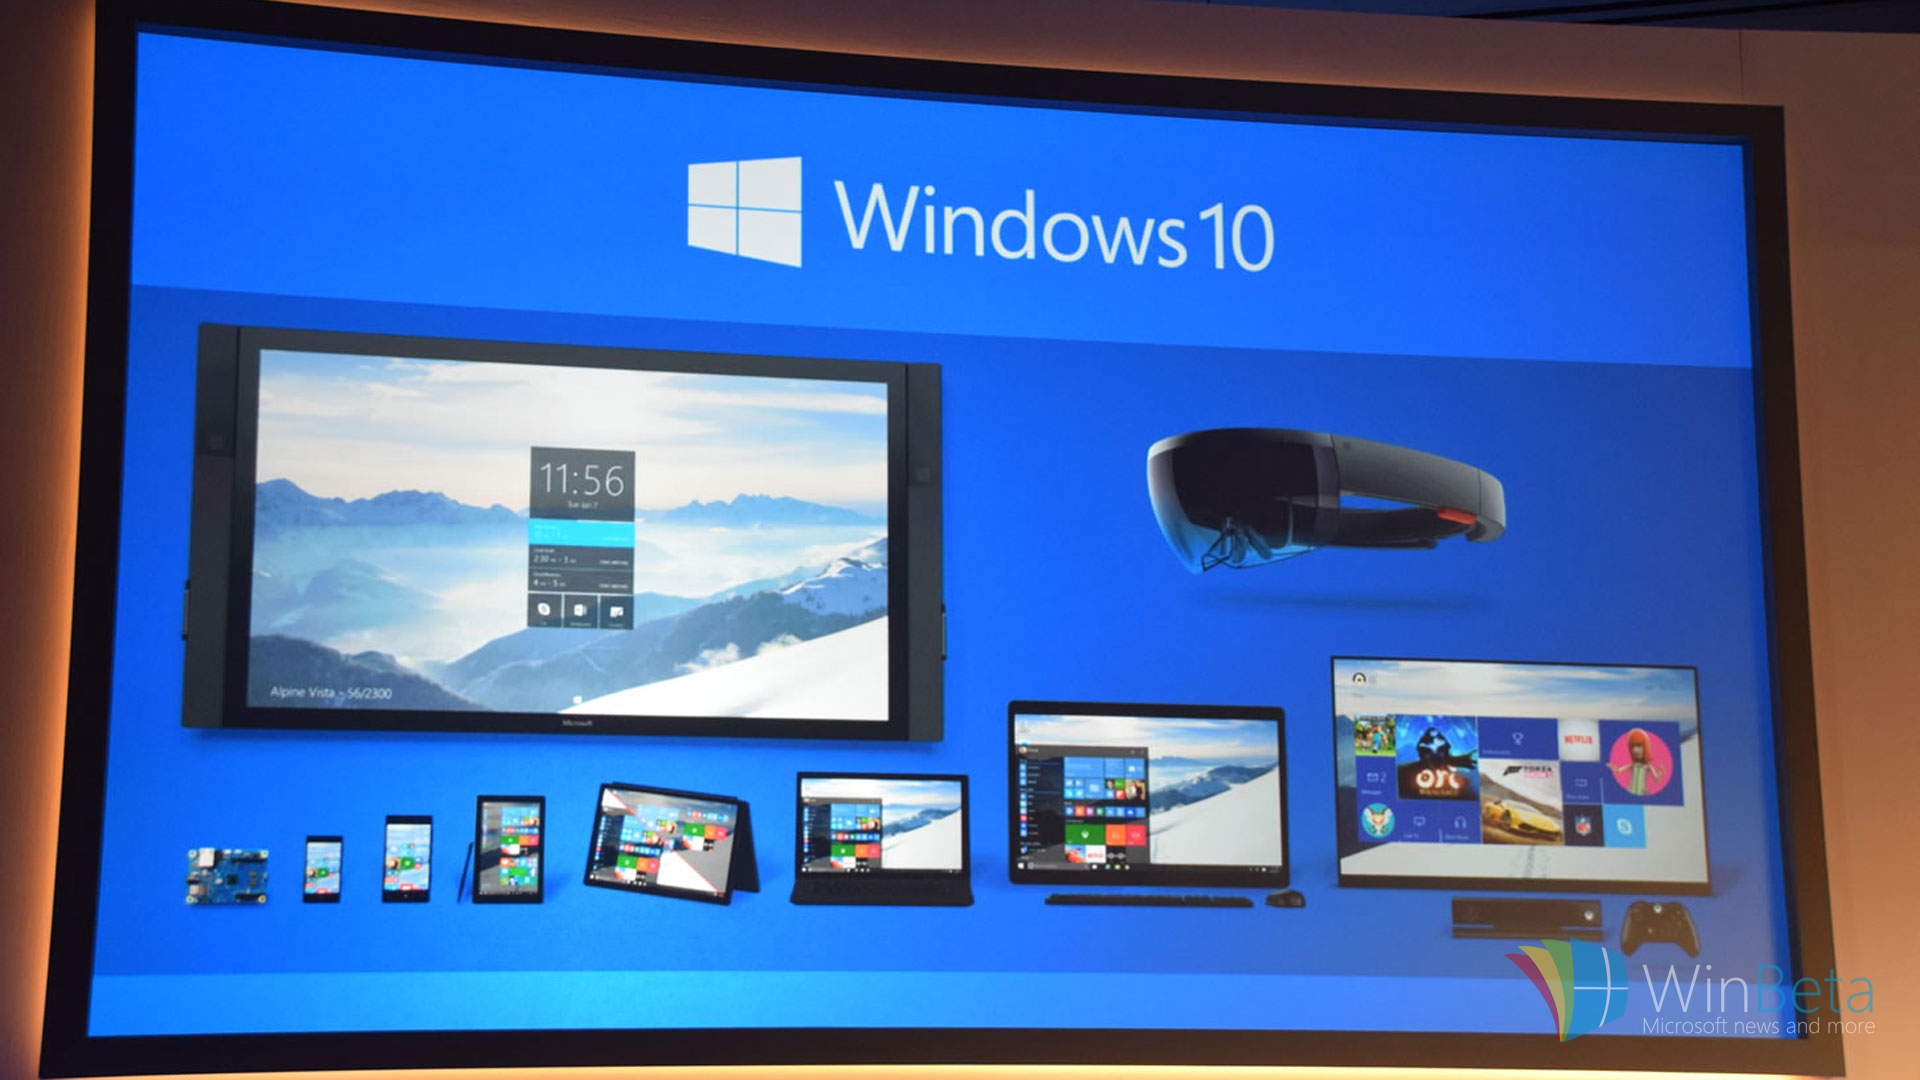 Windows 10 Devices with a screen size less than 8 inches will not